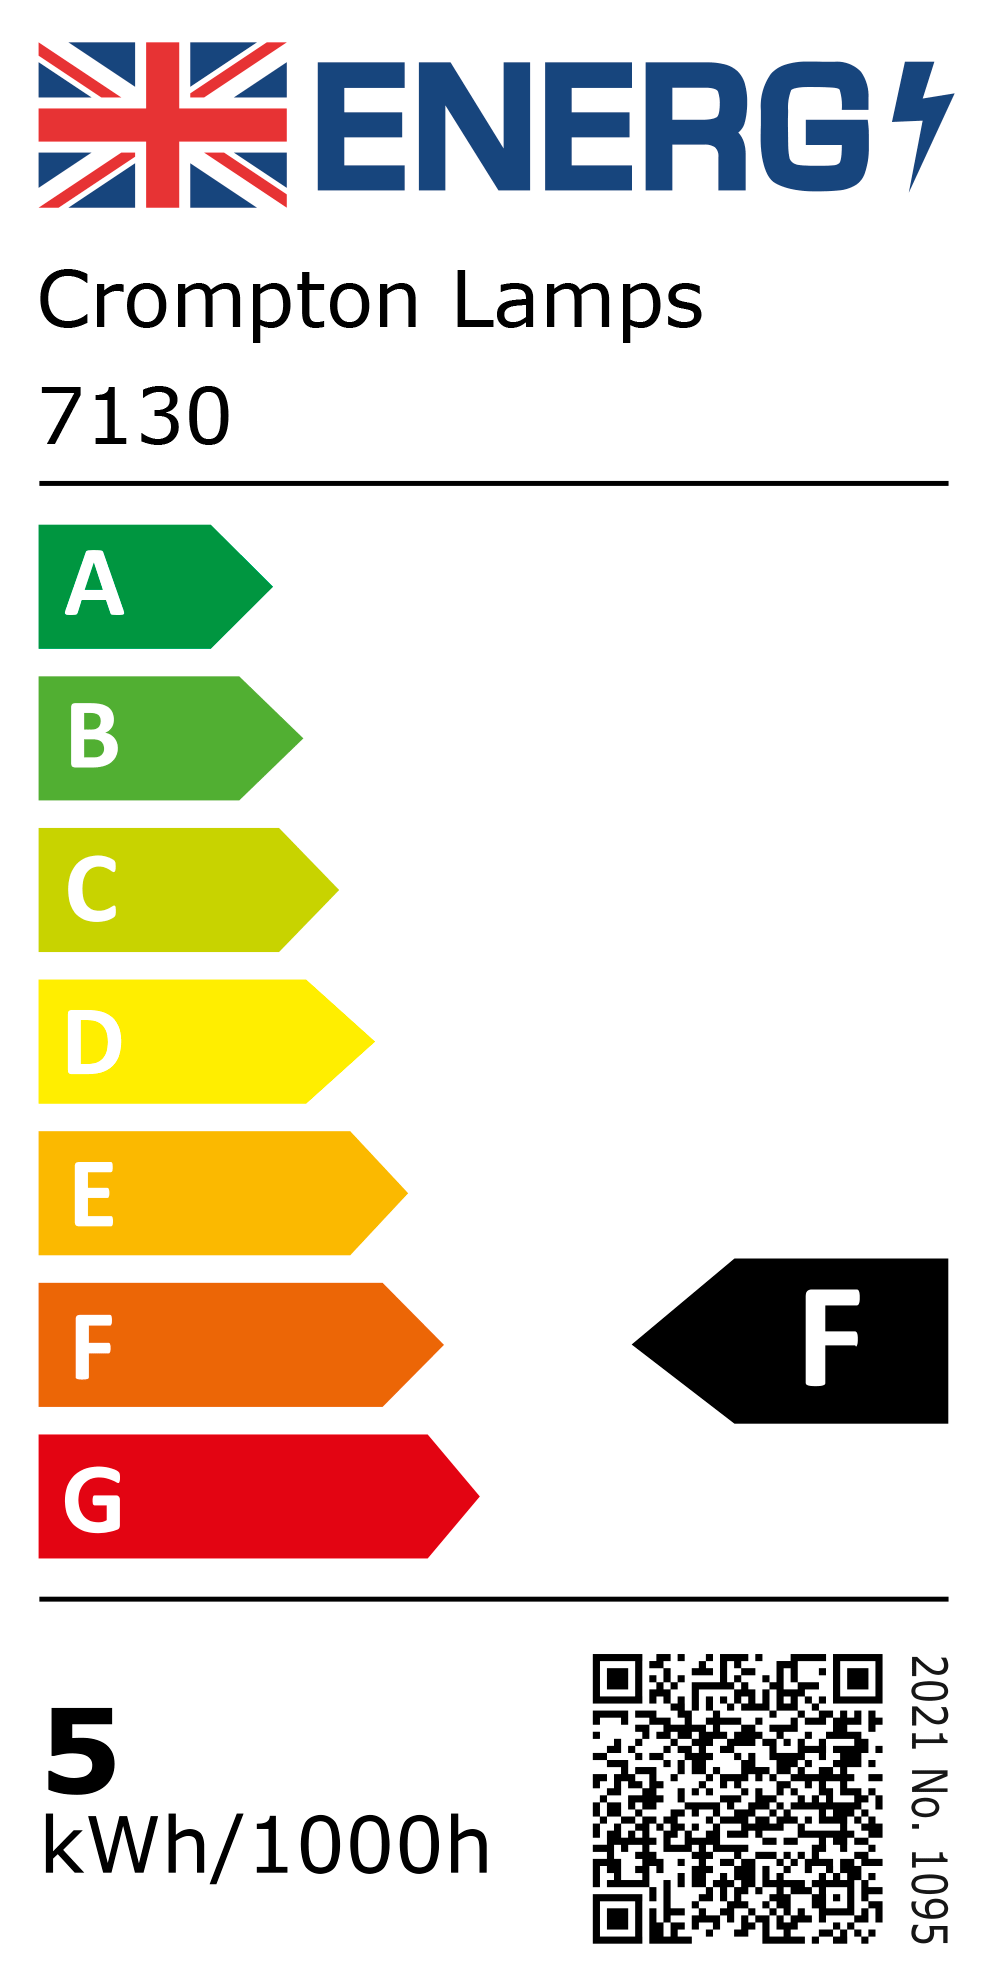 New 2021 Energy Rating Label: MPN 7130